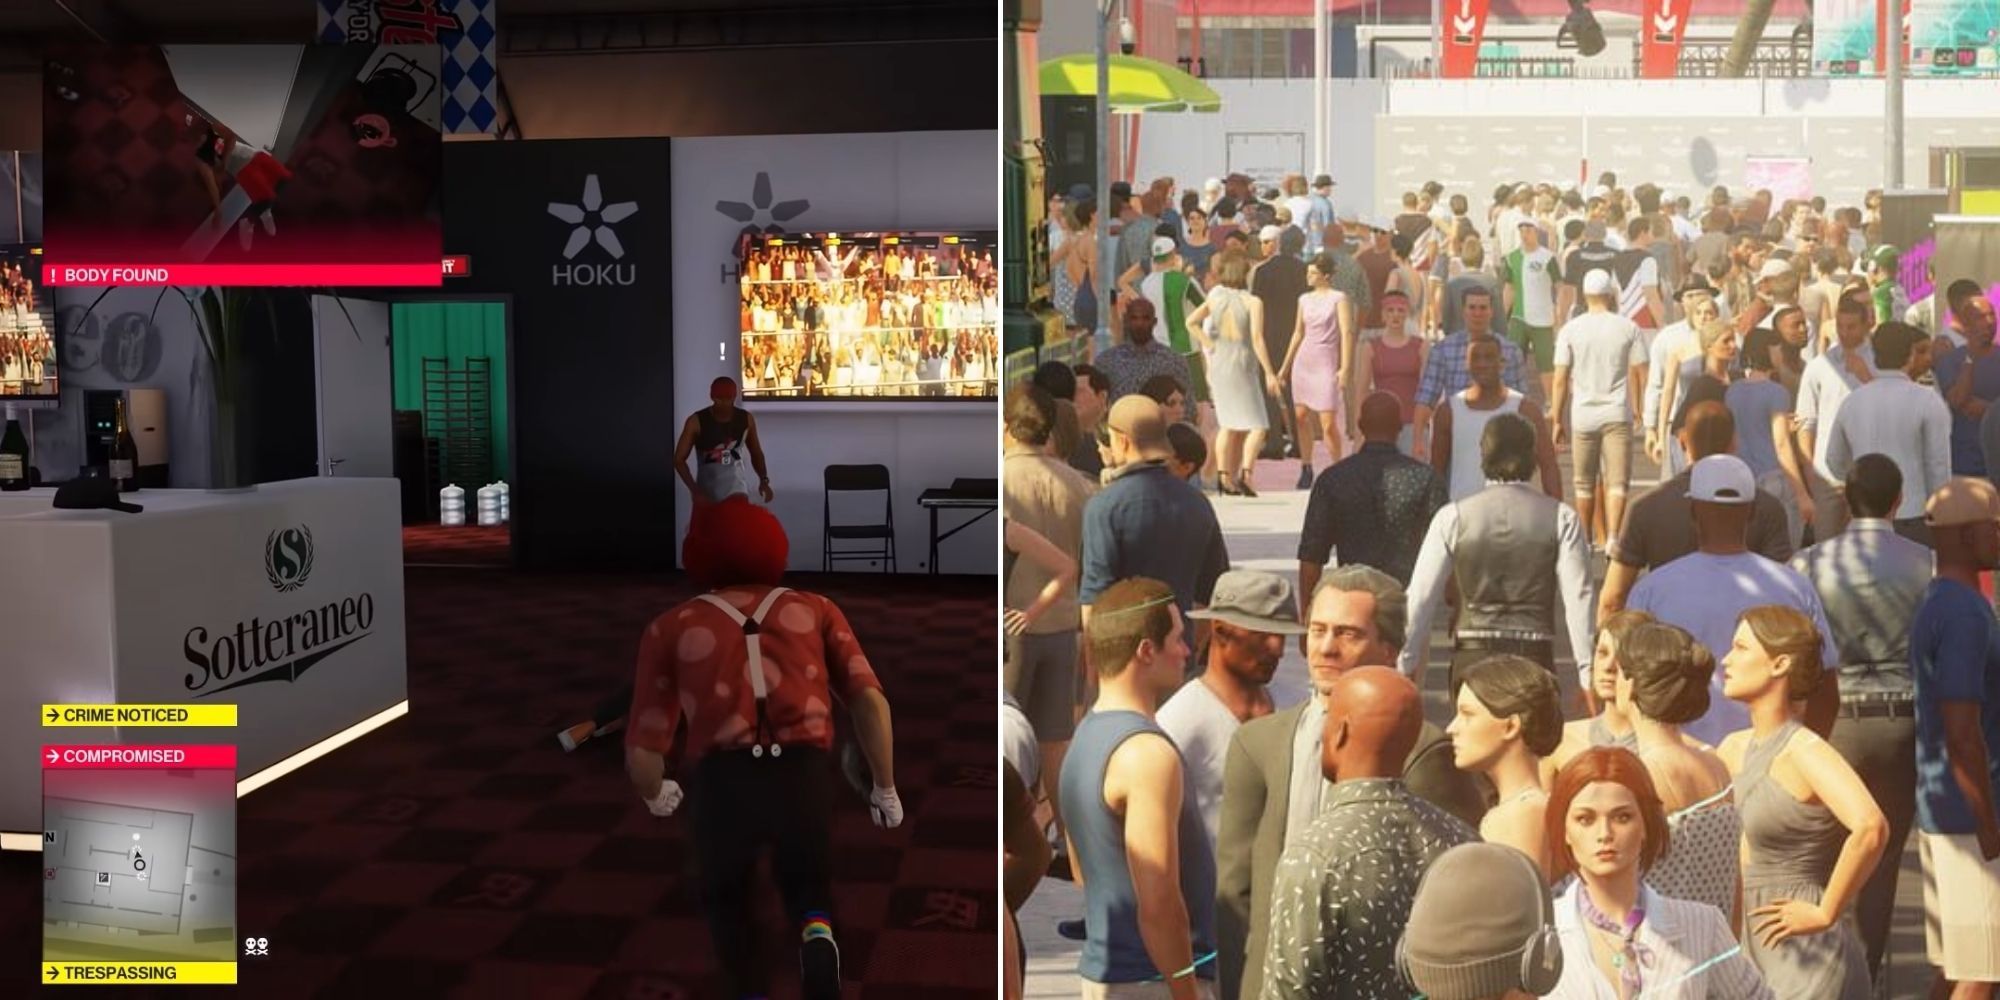 Hitman 2 - A body being discovered and Agent 47 compromised - A busy crowd